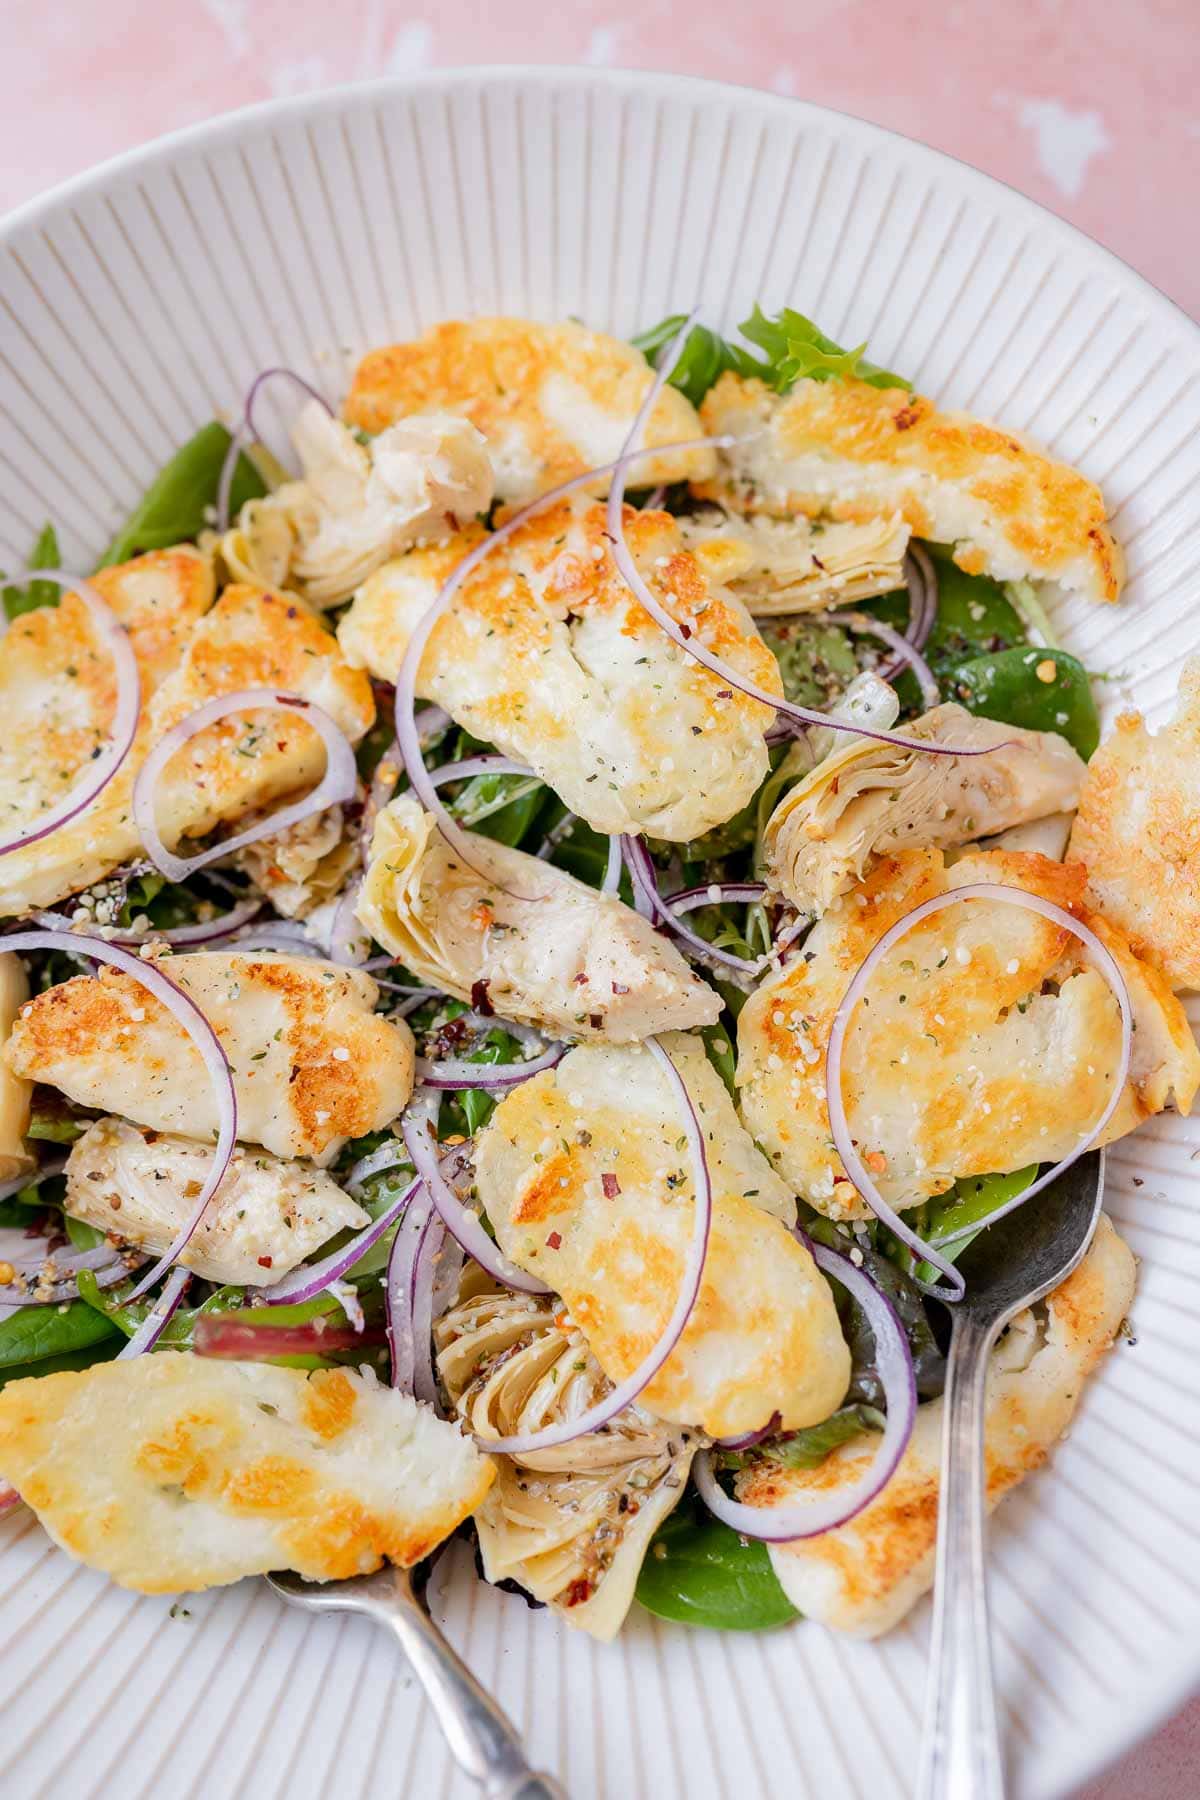 Silver silverware juts out of a large salad bowl filled with halloumi salad ingredients.